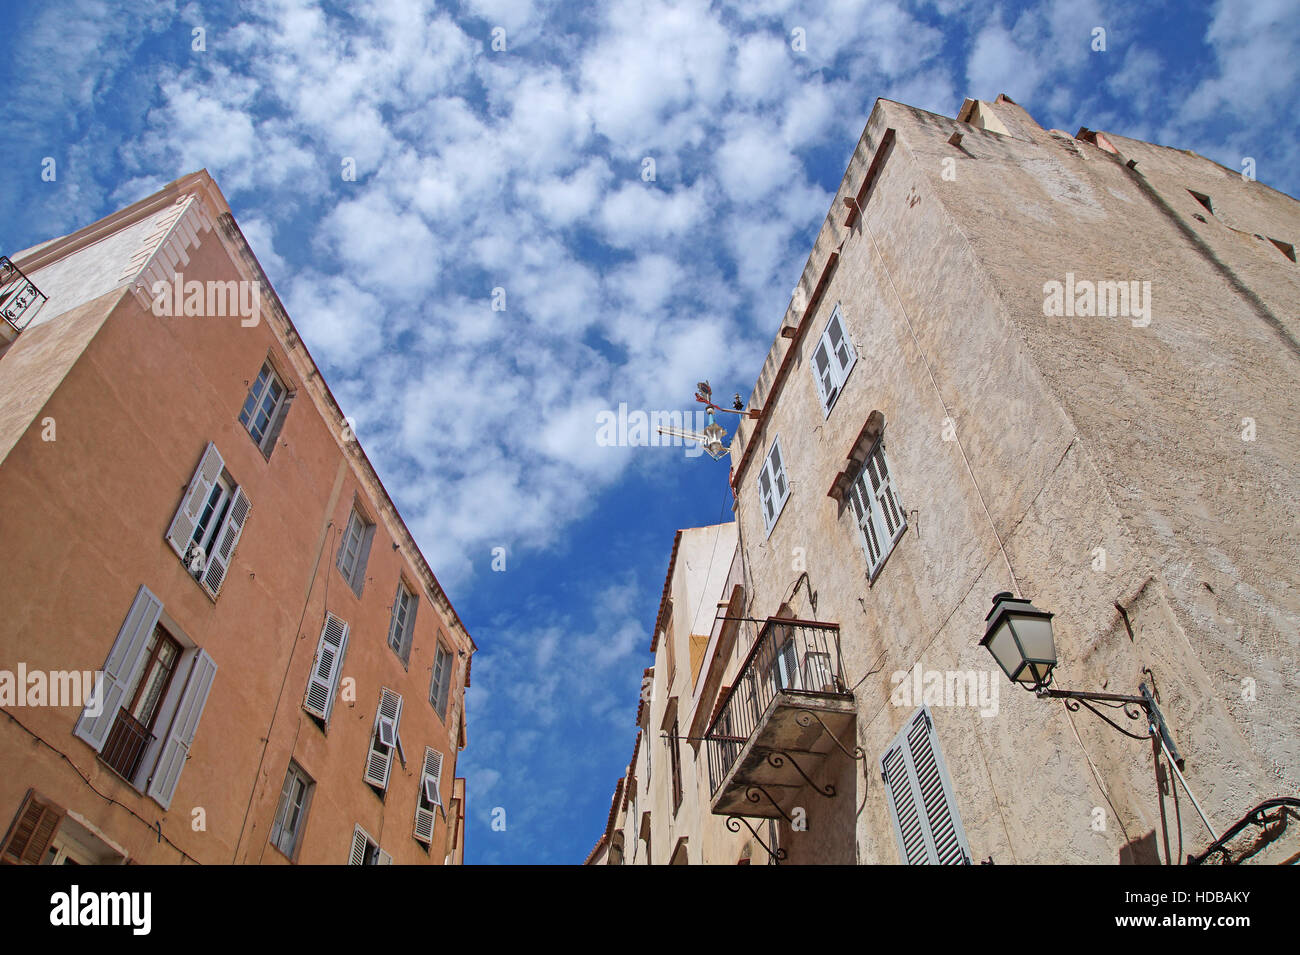 Colorful facades of old houses tradicional italy construction Stock Photo